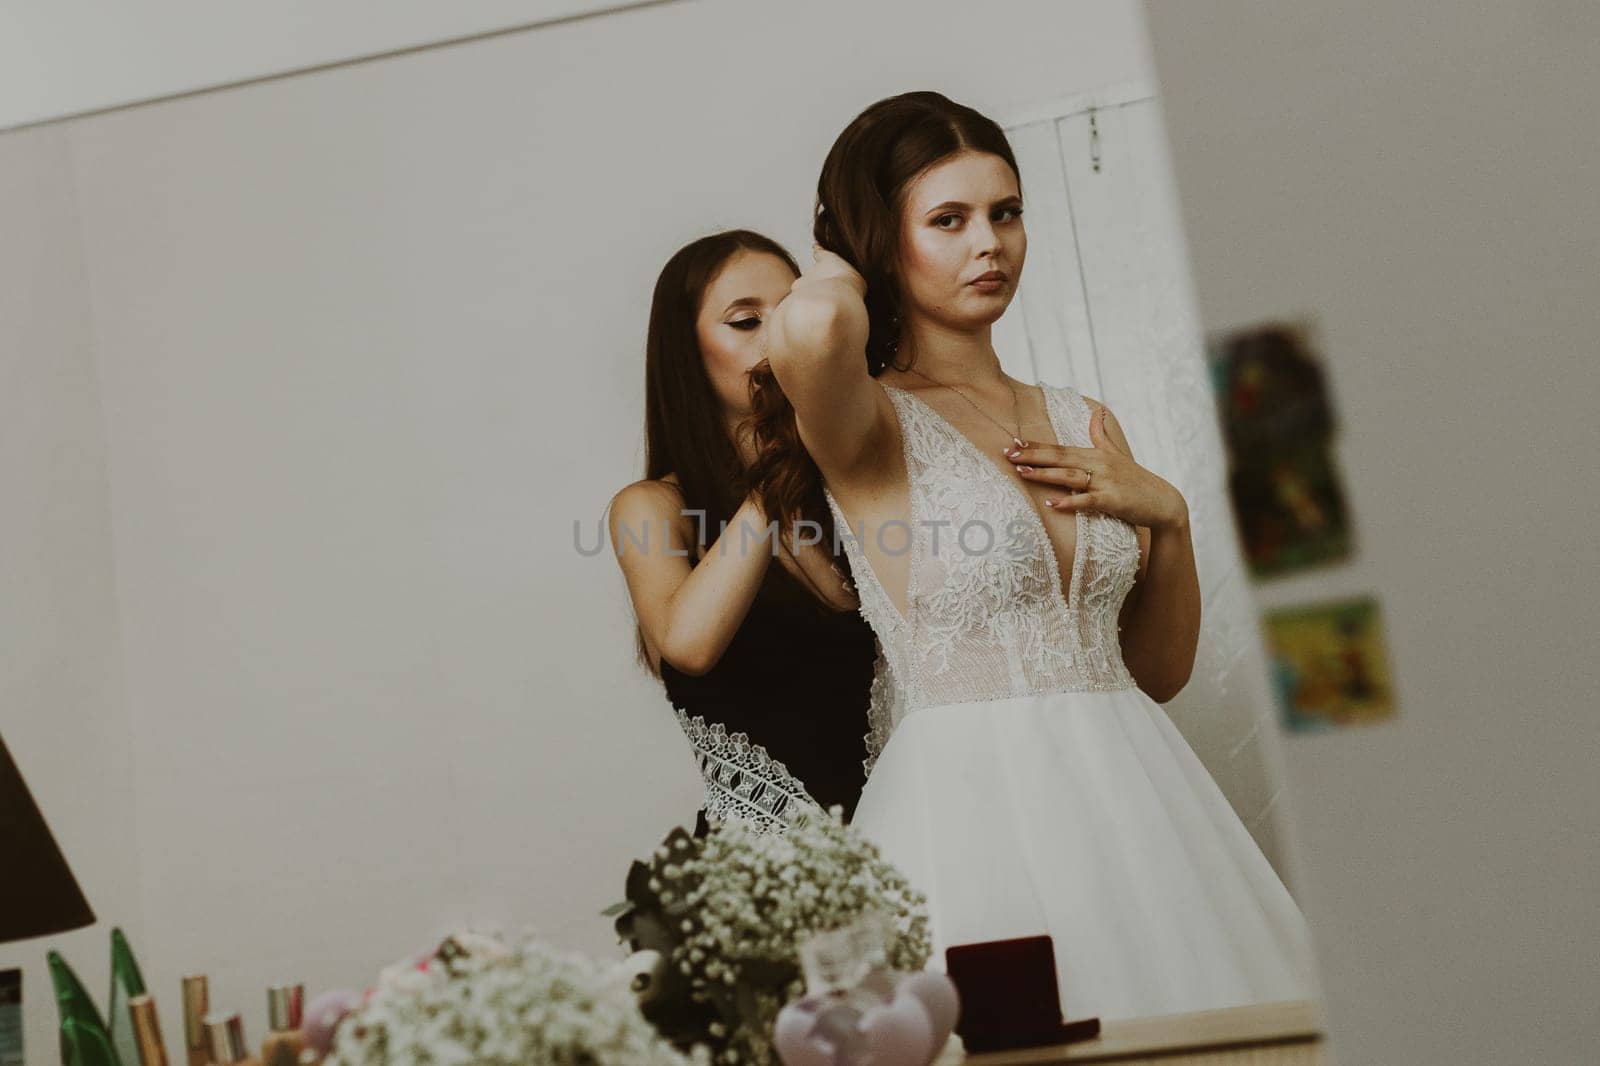 Portrait of a beautiful brunette bride and bridesmaid who fastens the clasp of a necklace around her neck, standing in a room reflected in a mirror, close-up side view.